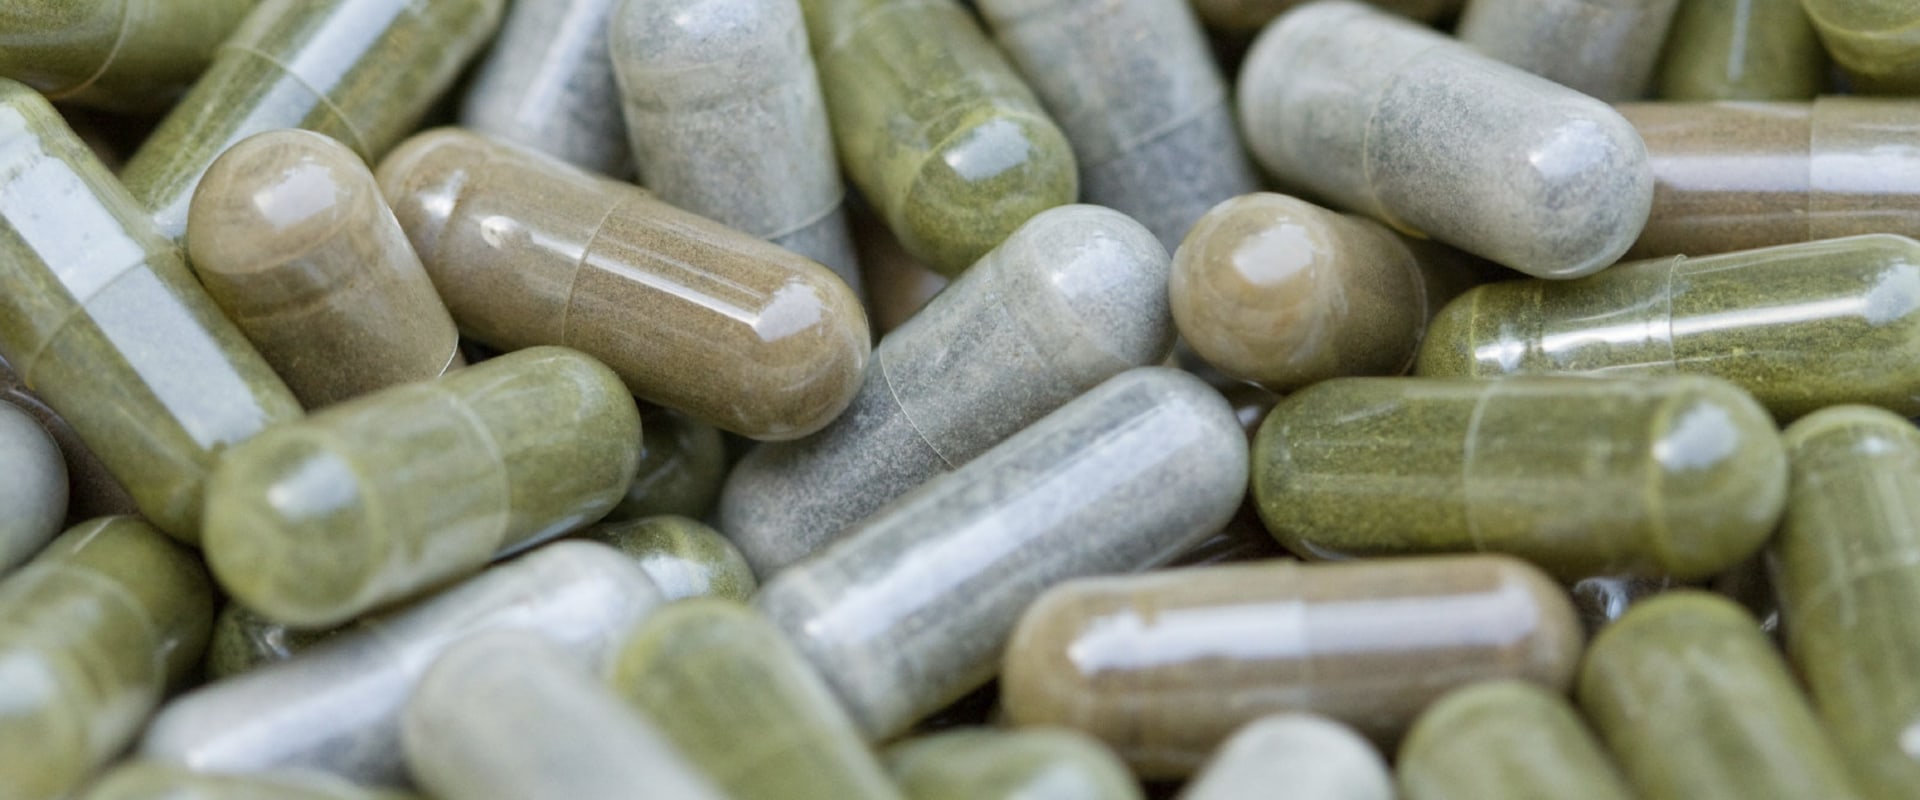 The Risks of Taking Nutritional Supplements: What You Need to Know